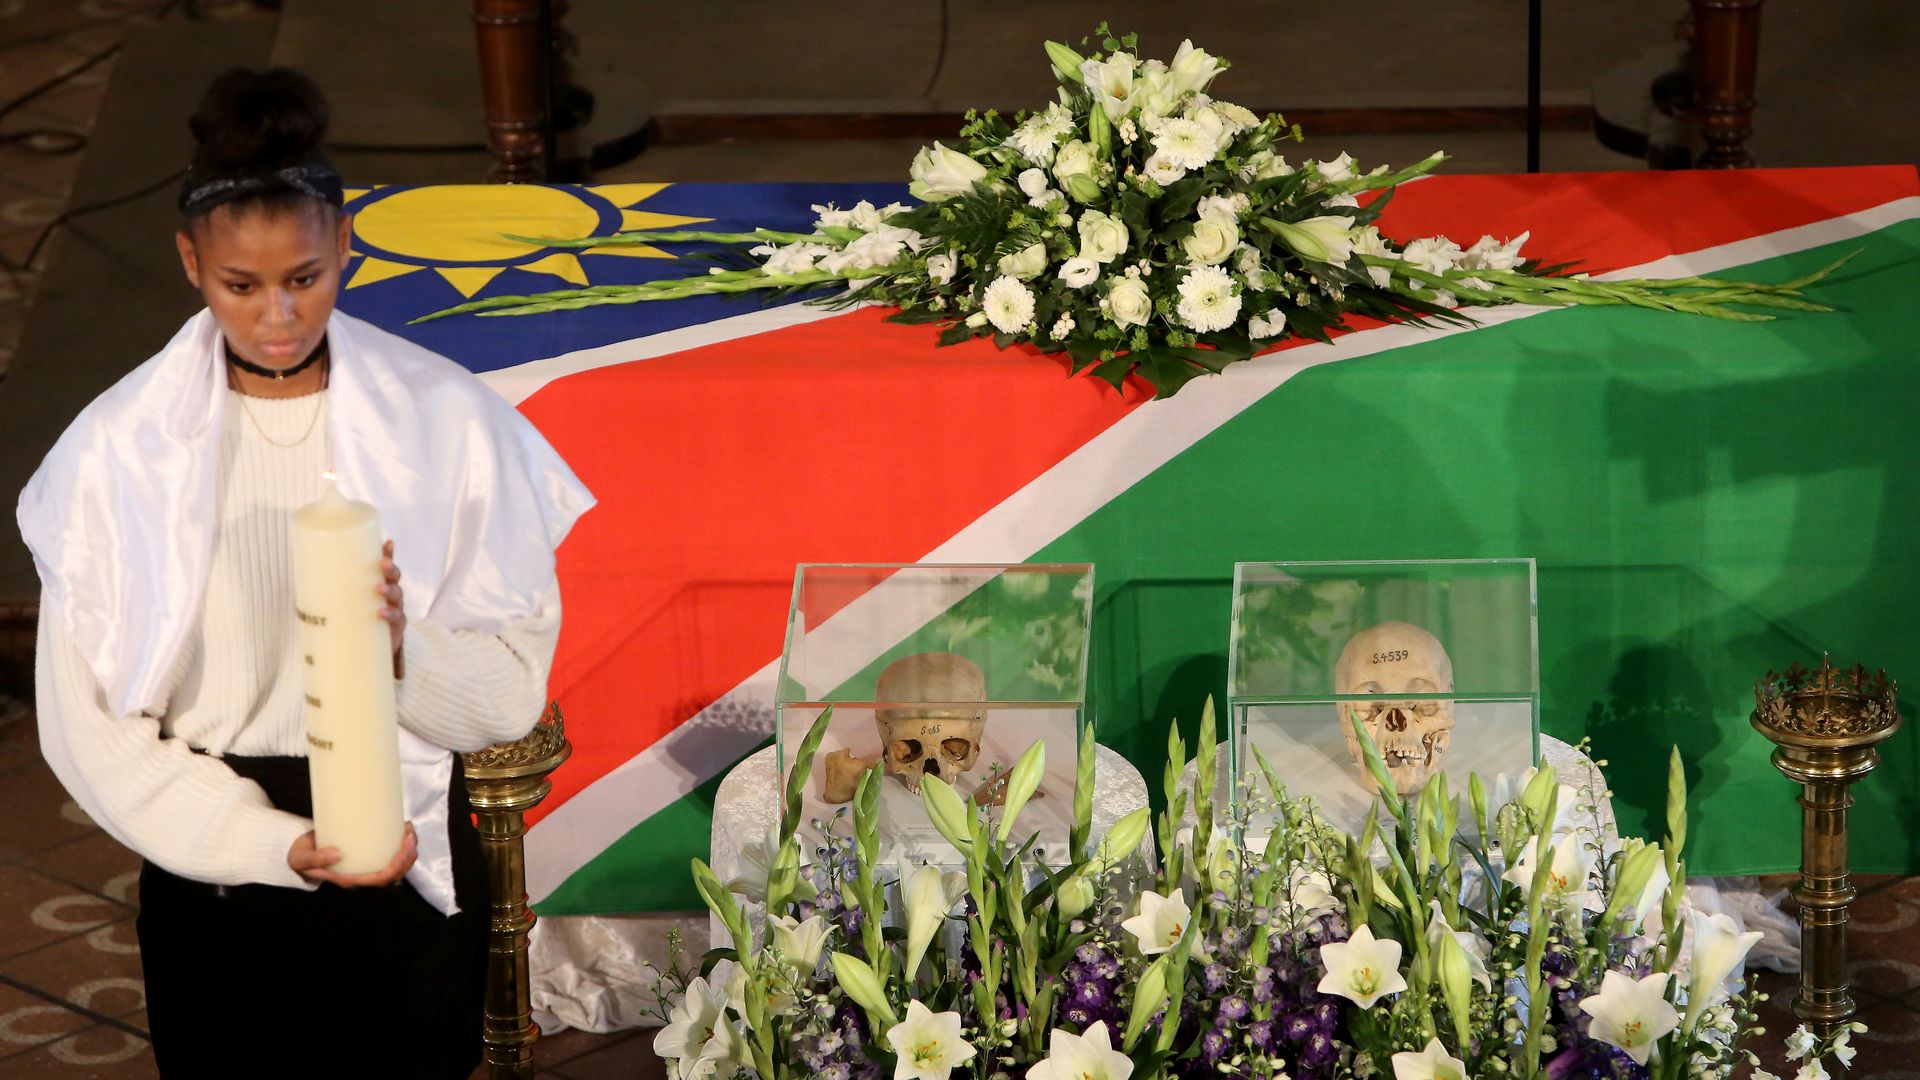 A repatriation ceremony of Namibian skulls at the Franzoesische Friedrichstadtkirche (French Cathedral) on Gendarmenmarkt on August 29, 2018 in Berlin, Germany. 